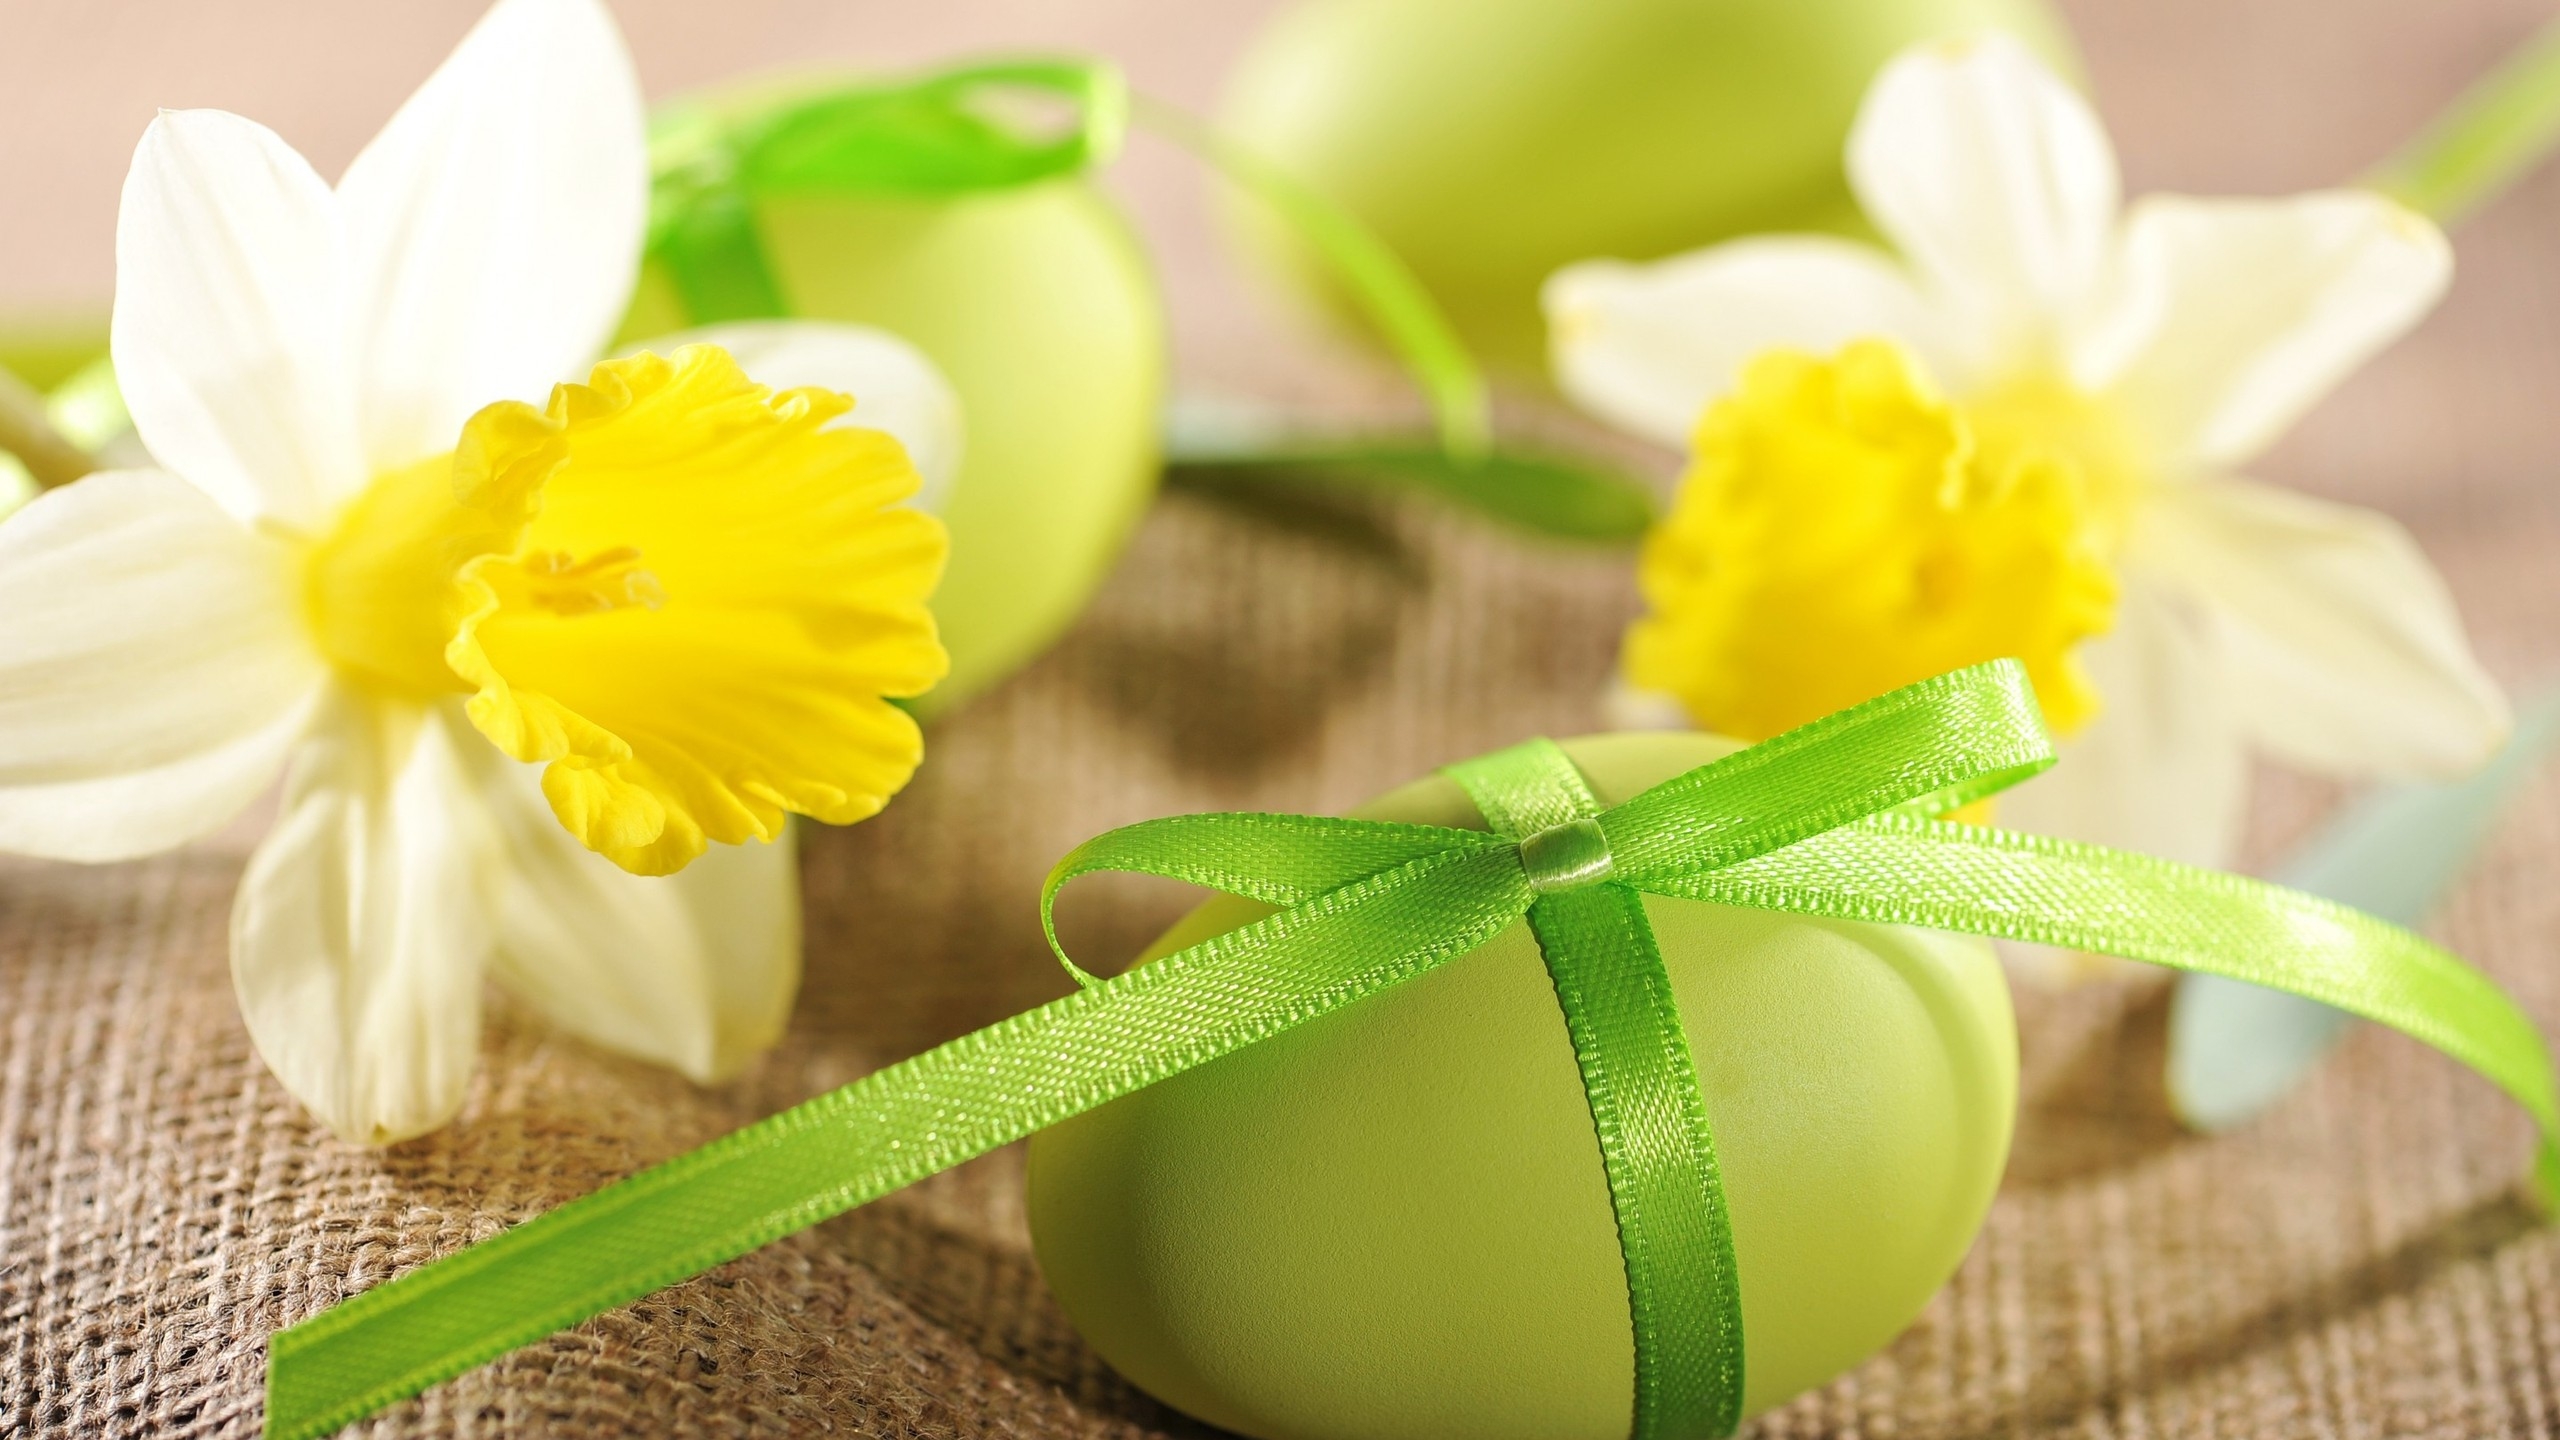 Daffodils and Easter Eggs  for 2560x1440 HDTV resolution